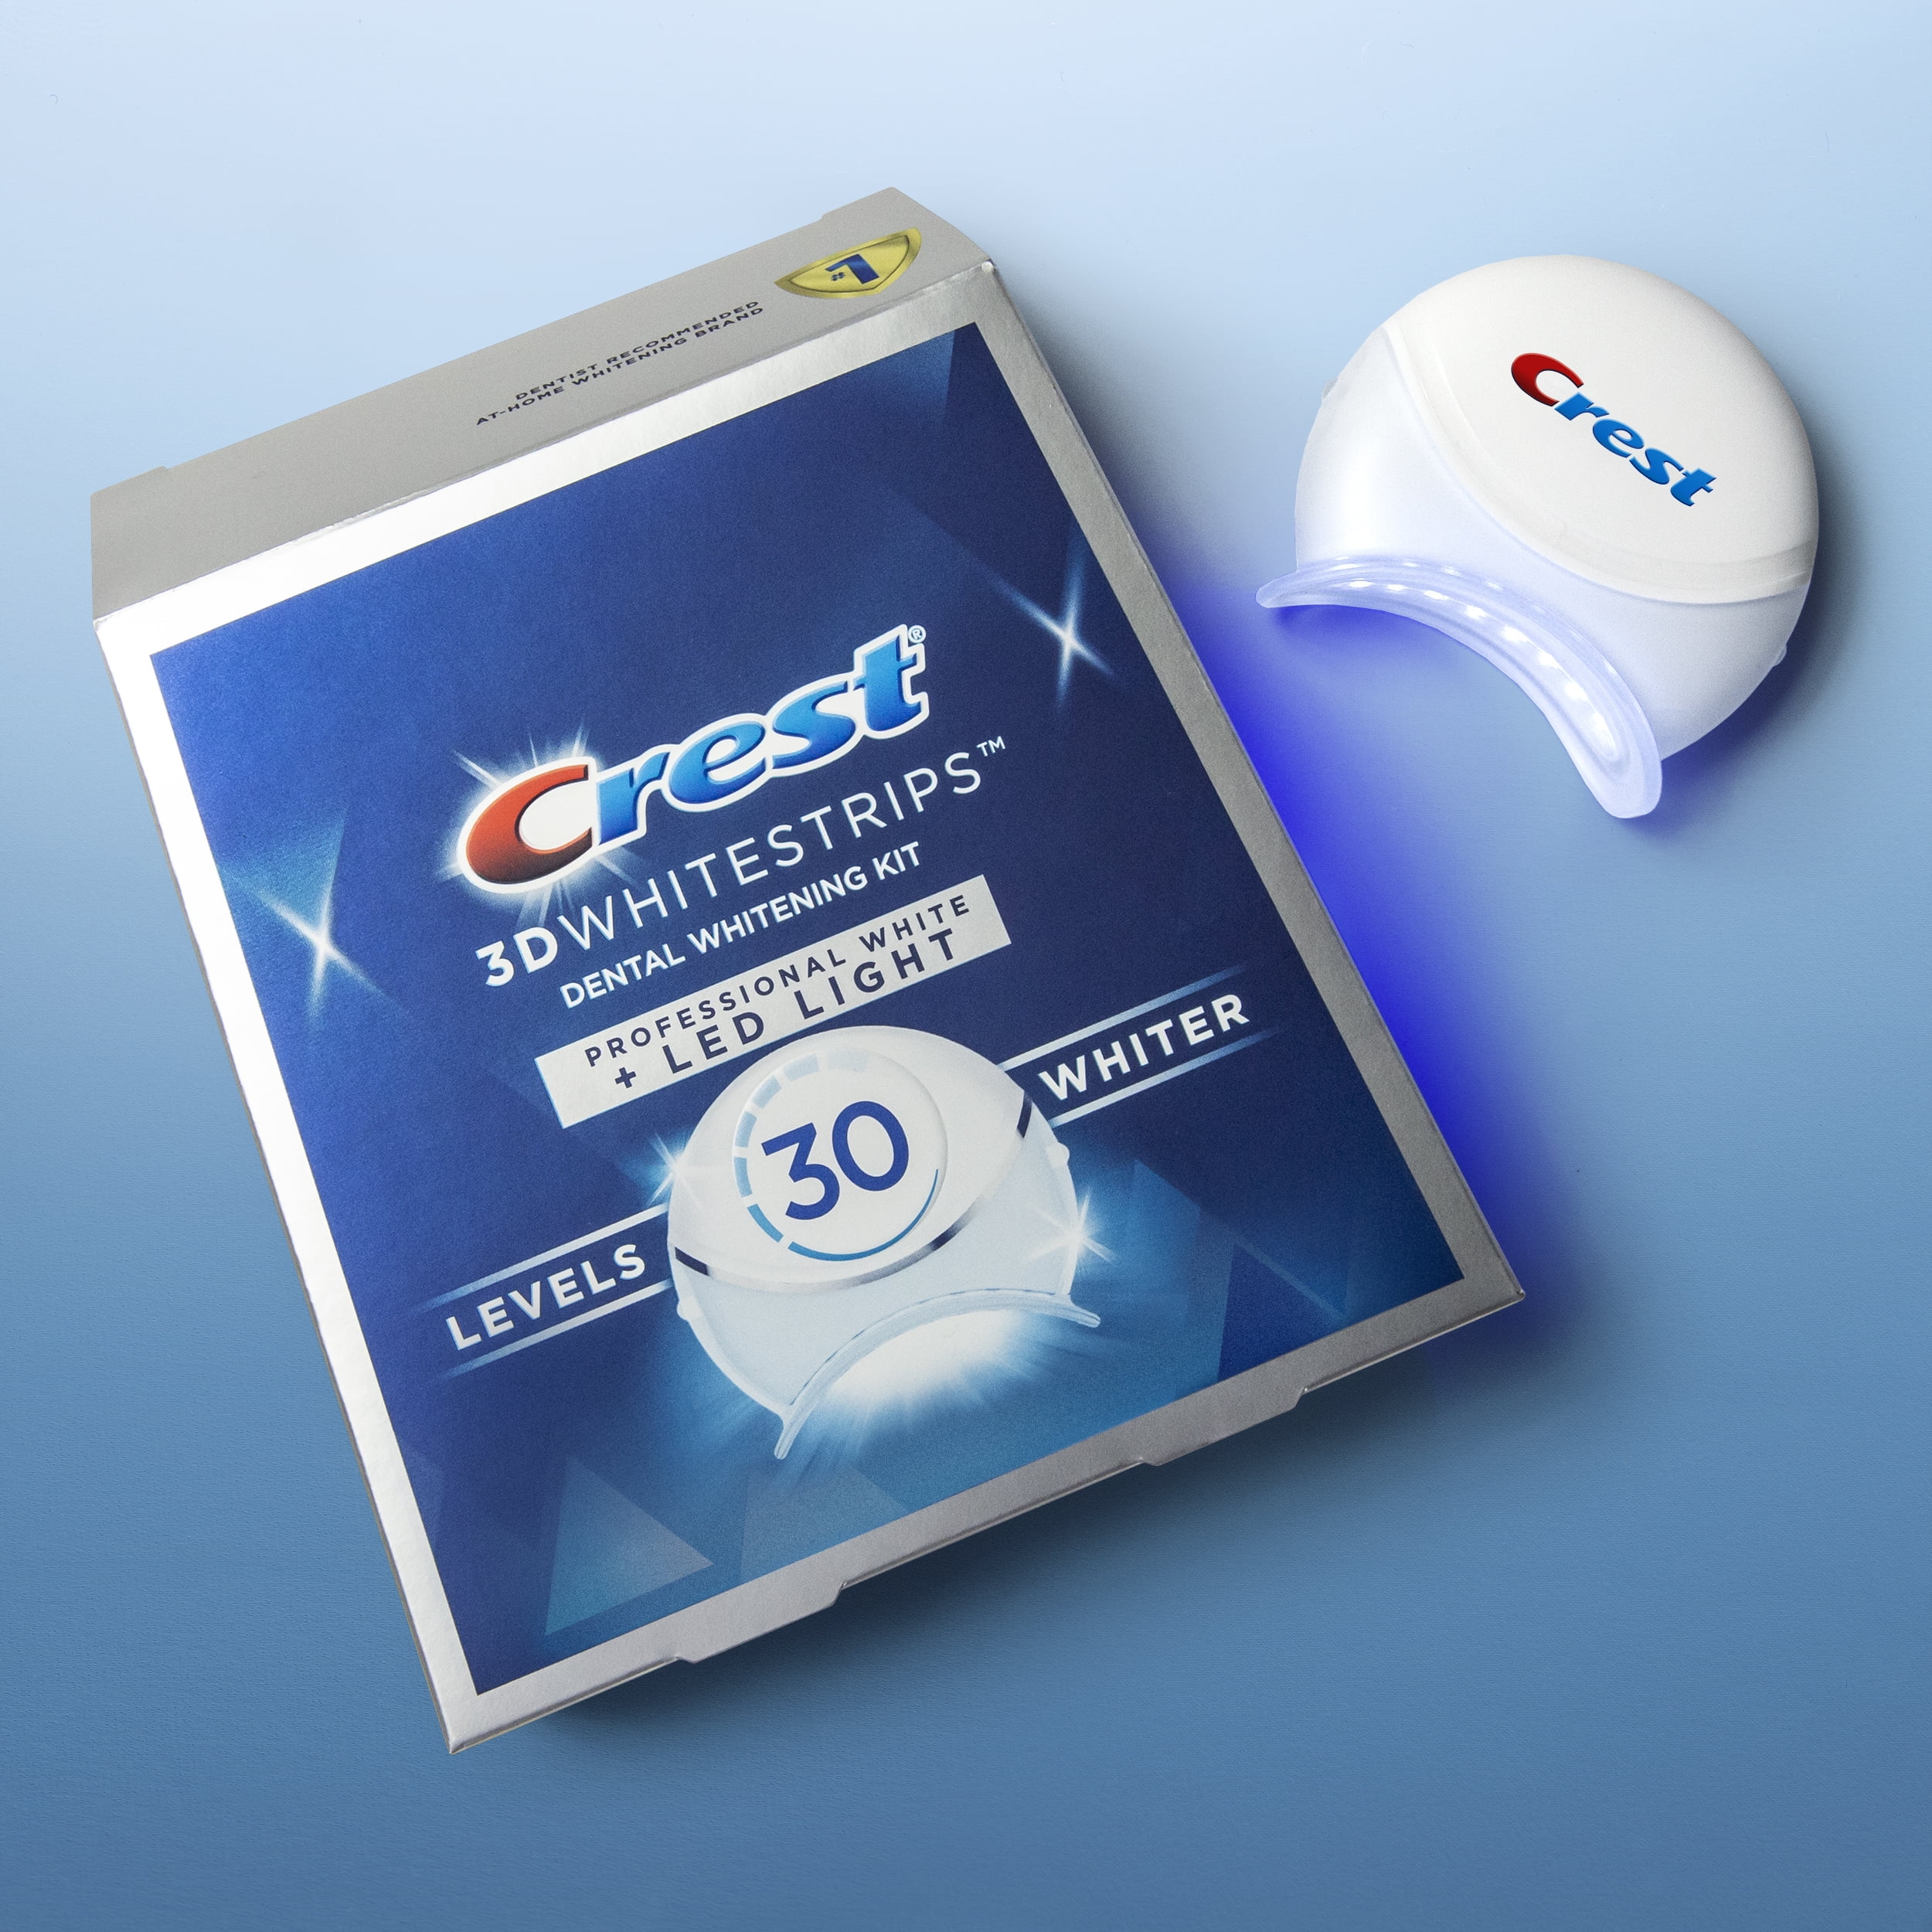 Crest 3DWhitestrips Professional White with LED Accelerator Light 